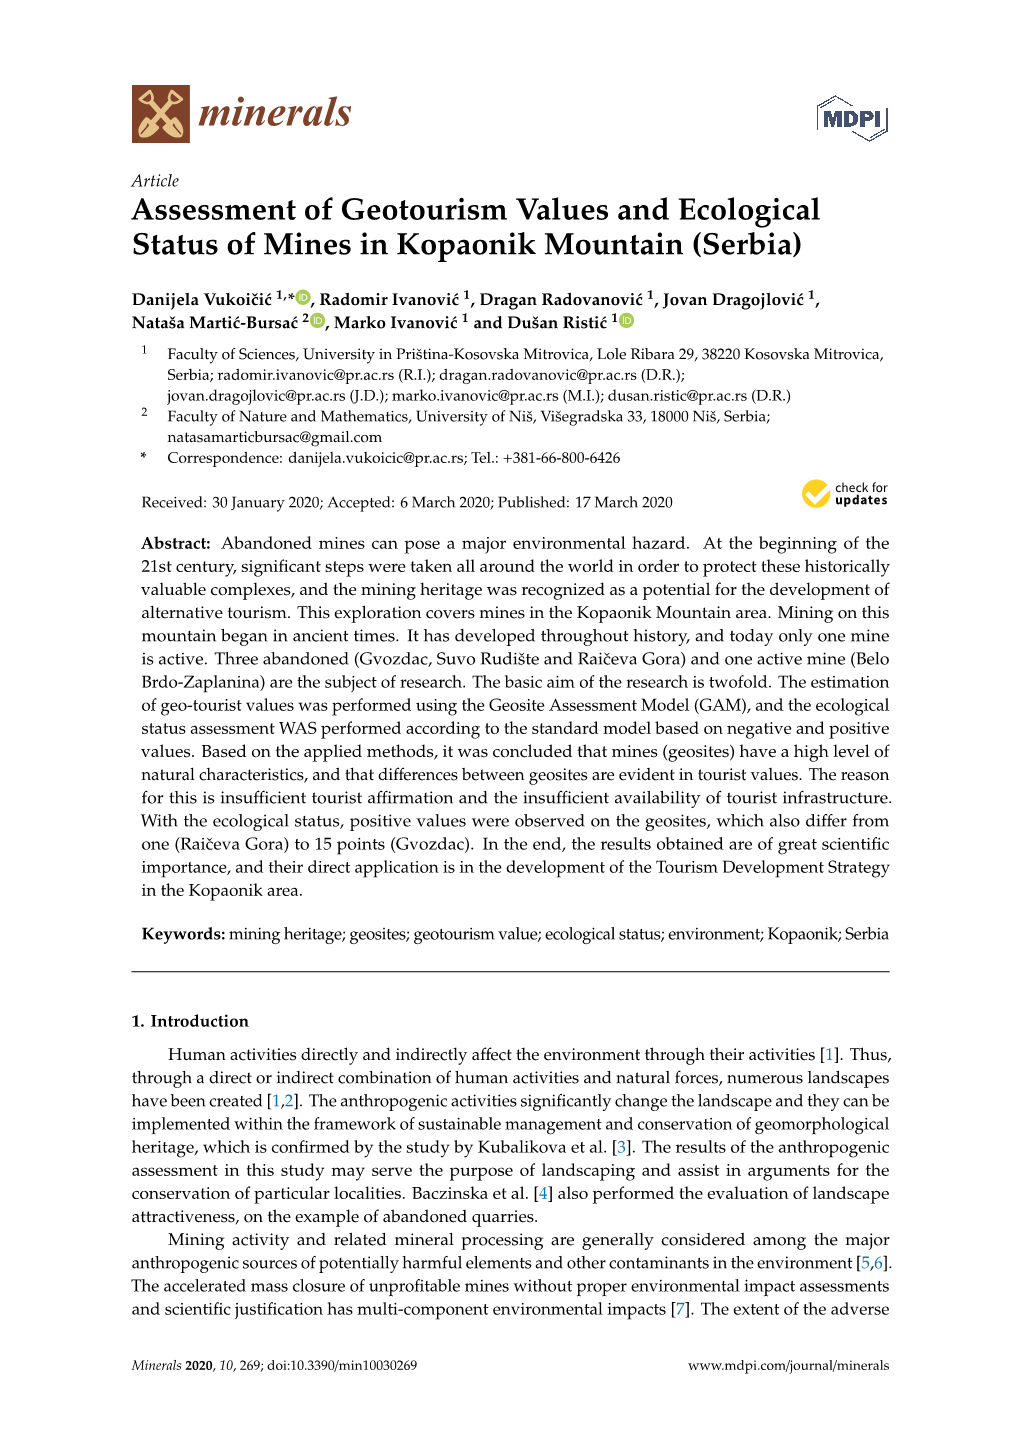 Assessment of Geotourism Values and Ecological Status of Mines in Kopaonik Mountain (Serbia)